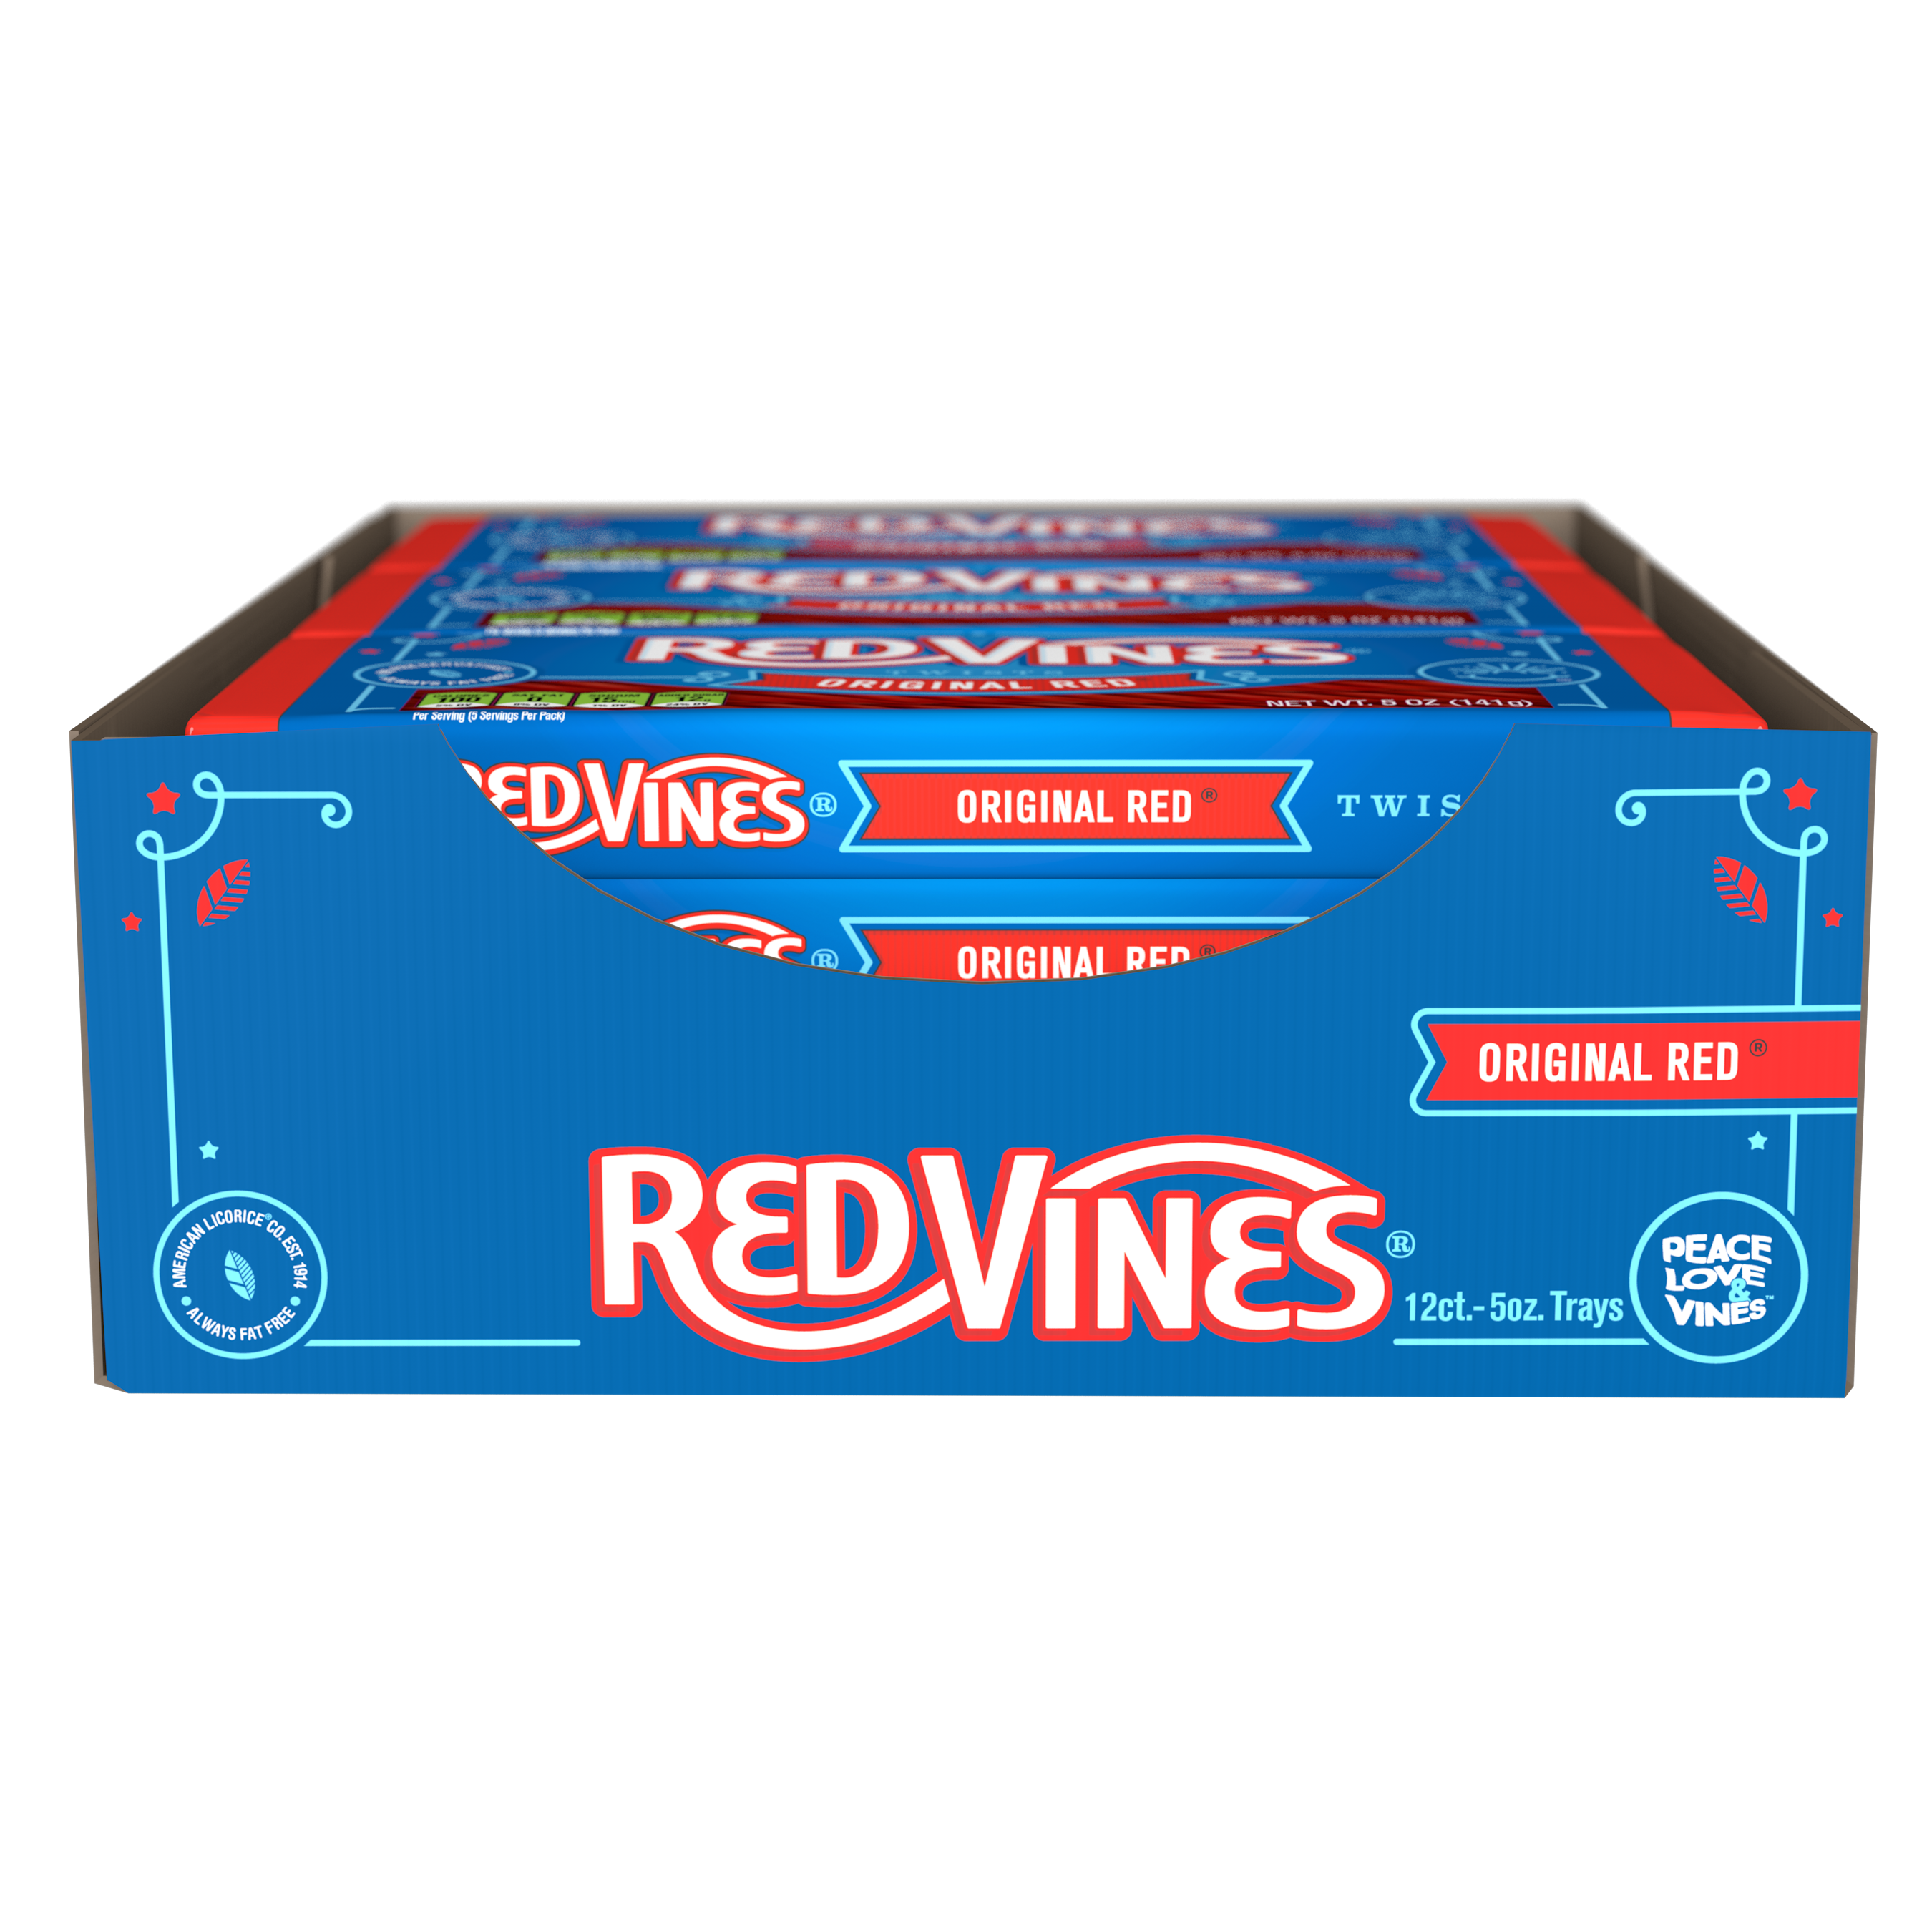 Red Vines Original Red® Chewy Licorice Twists 5oz